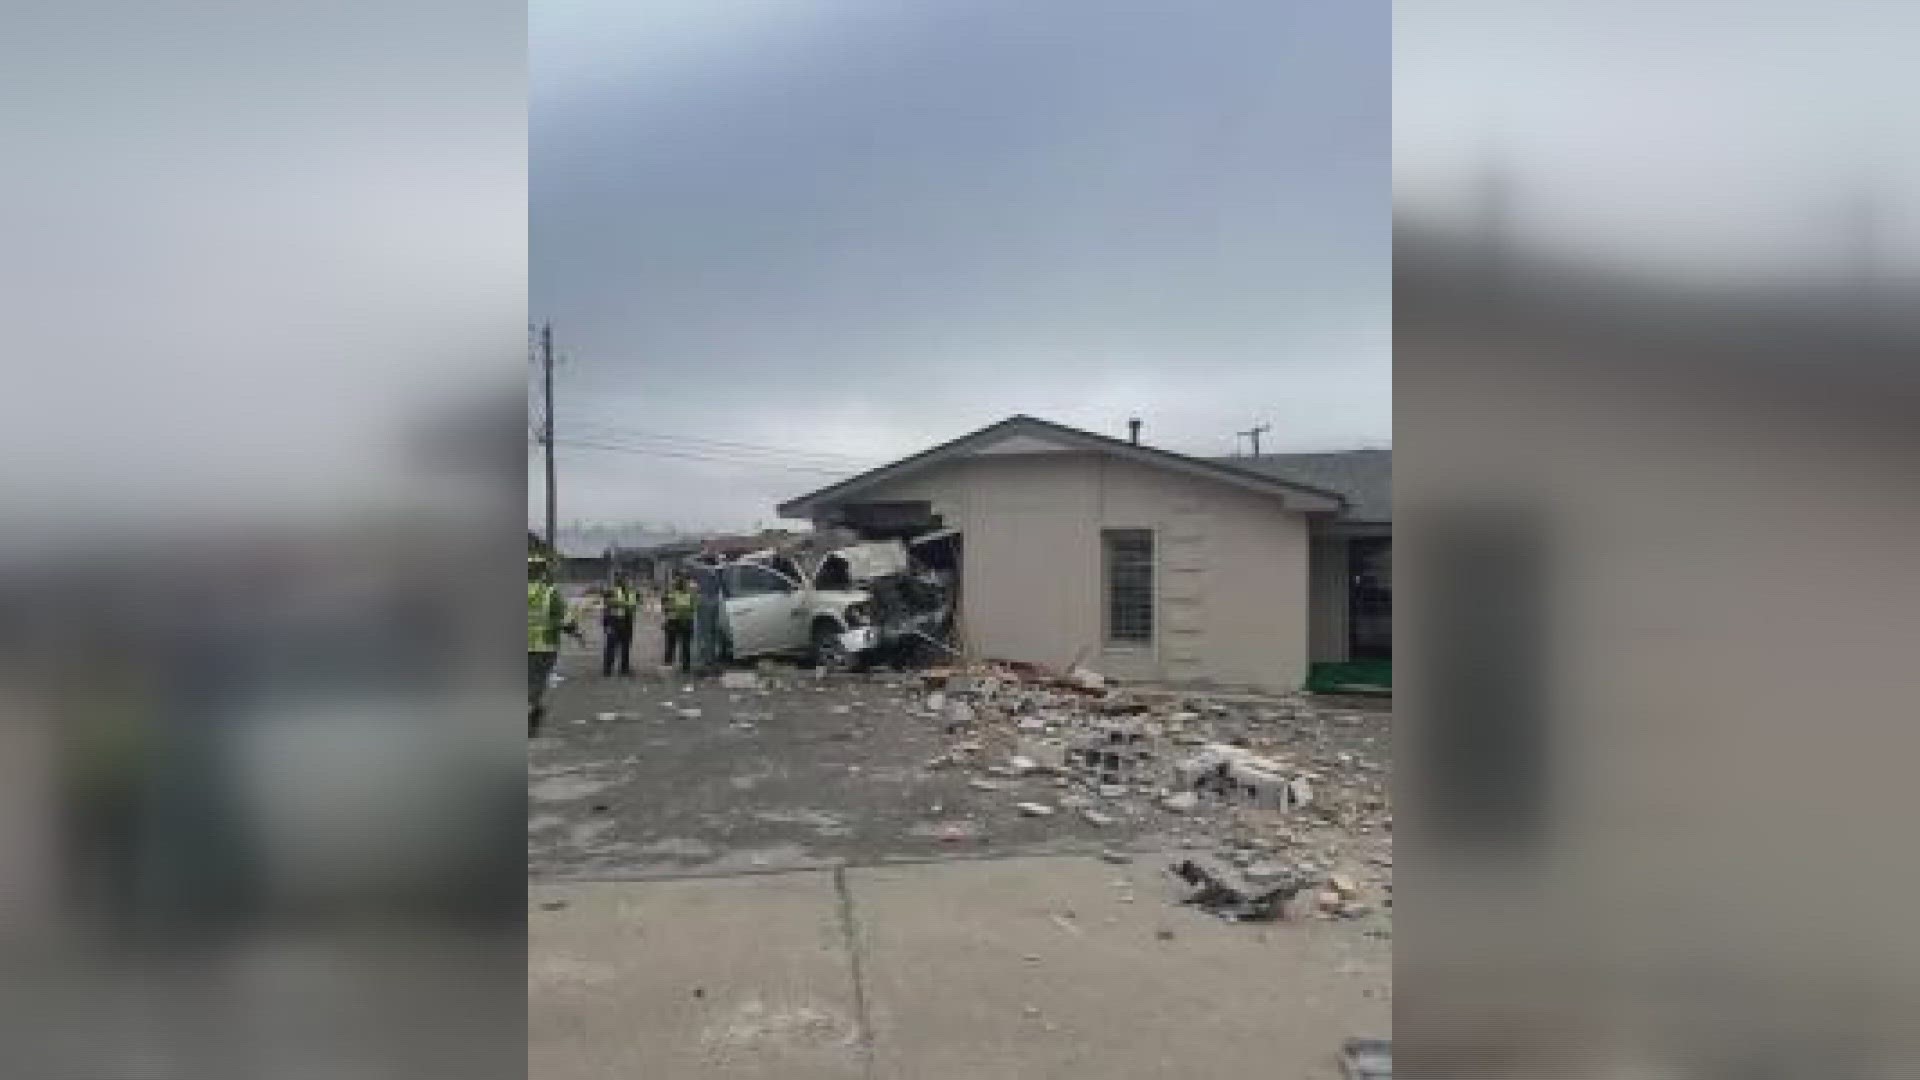 According to the City of Odessa, first responders found a pickup truck that ran into the Apple Chiropractic Clinic. No injuries were reported.